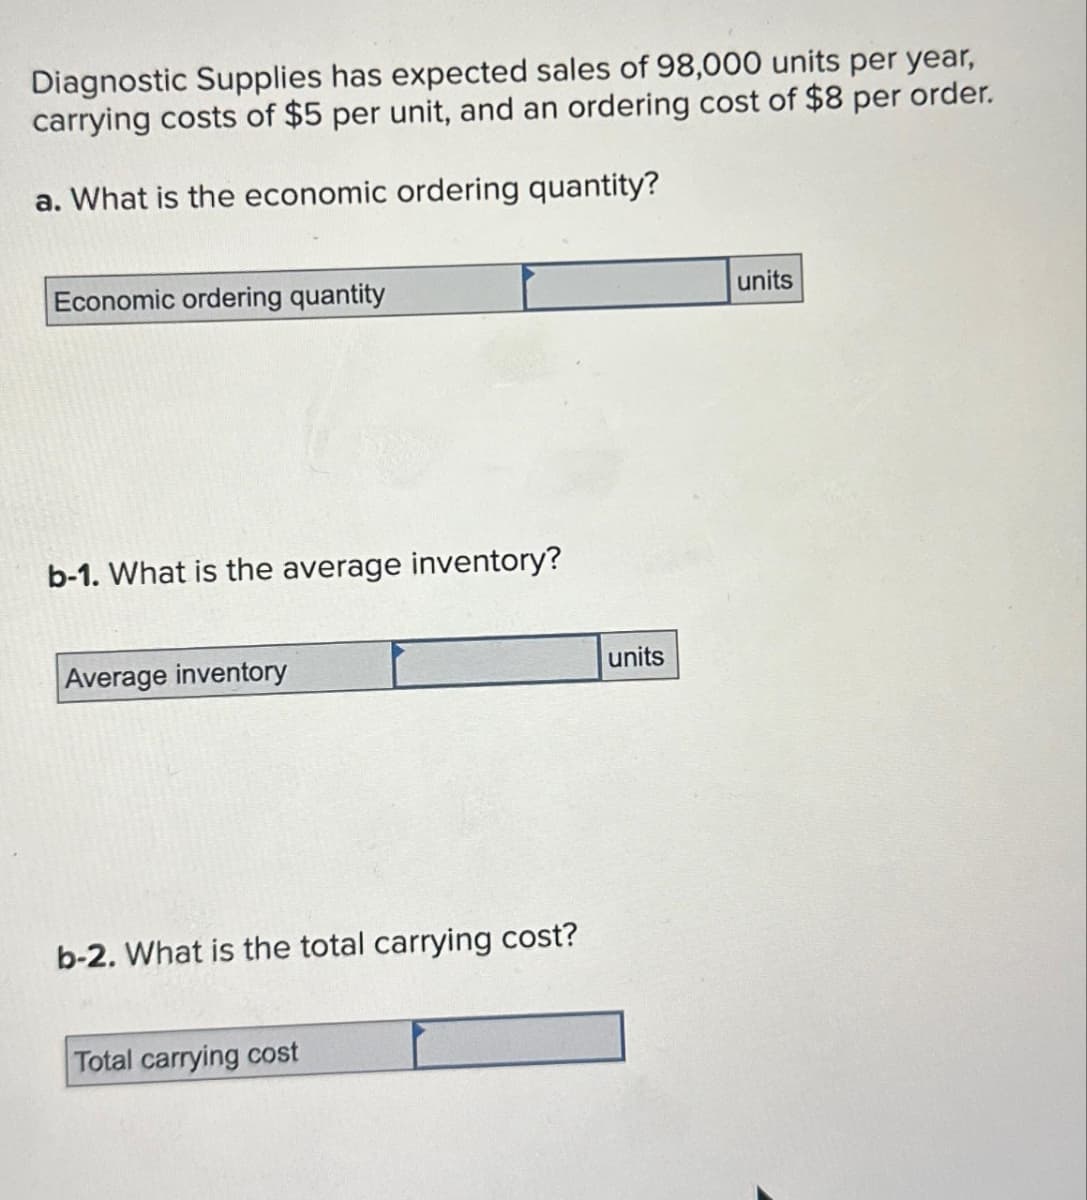 Diagnostic Supplies has expected sales of 98,000 units per year,
carrying costs of $5 per unit, and an ordering cost of $8 per order.
a. What is the economic ordering quantity?
Economic ordering quantity
b-1. What is the average inventory?
Average inventory
b-2. What is the total carrying cost?
Total carrying cost
units
units